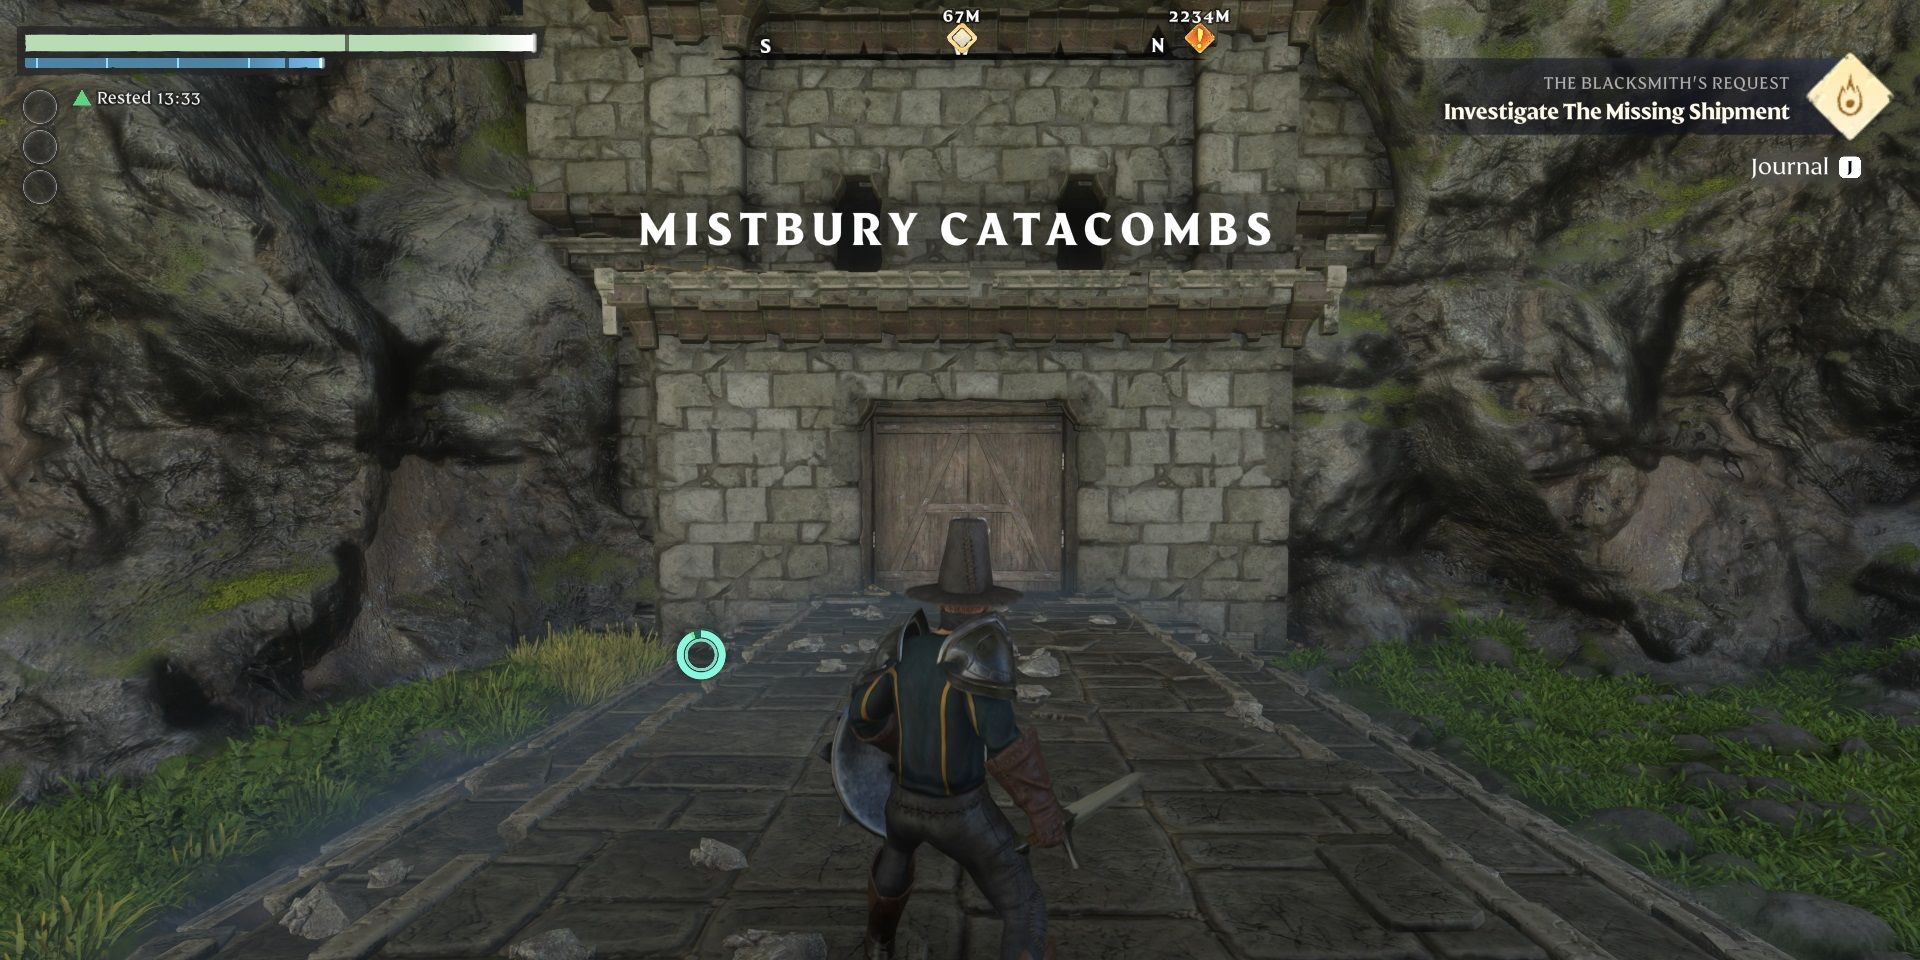 Unravel Mistbury Catacombs Puzzle in Enshrouded: A Guide 3